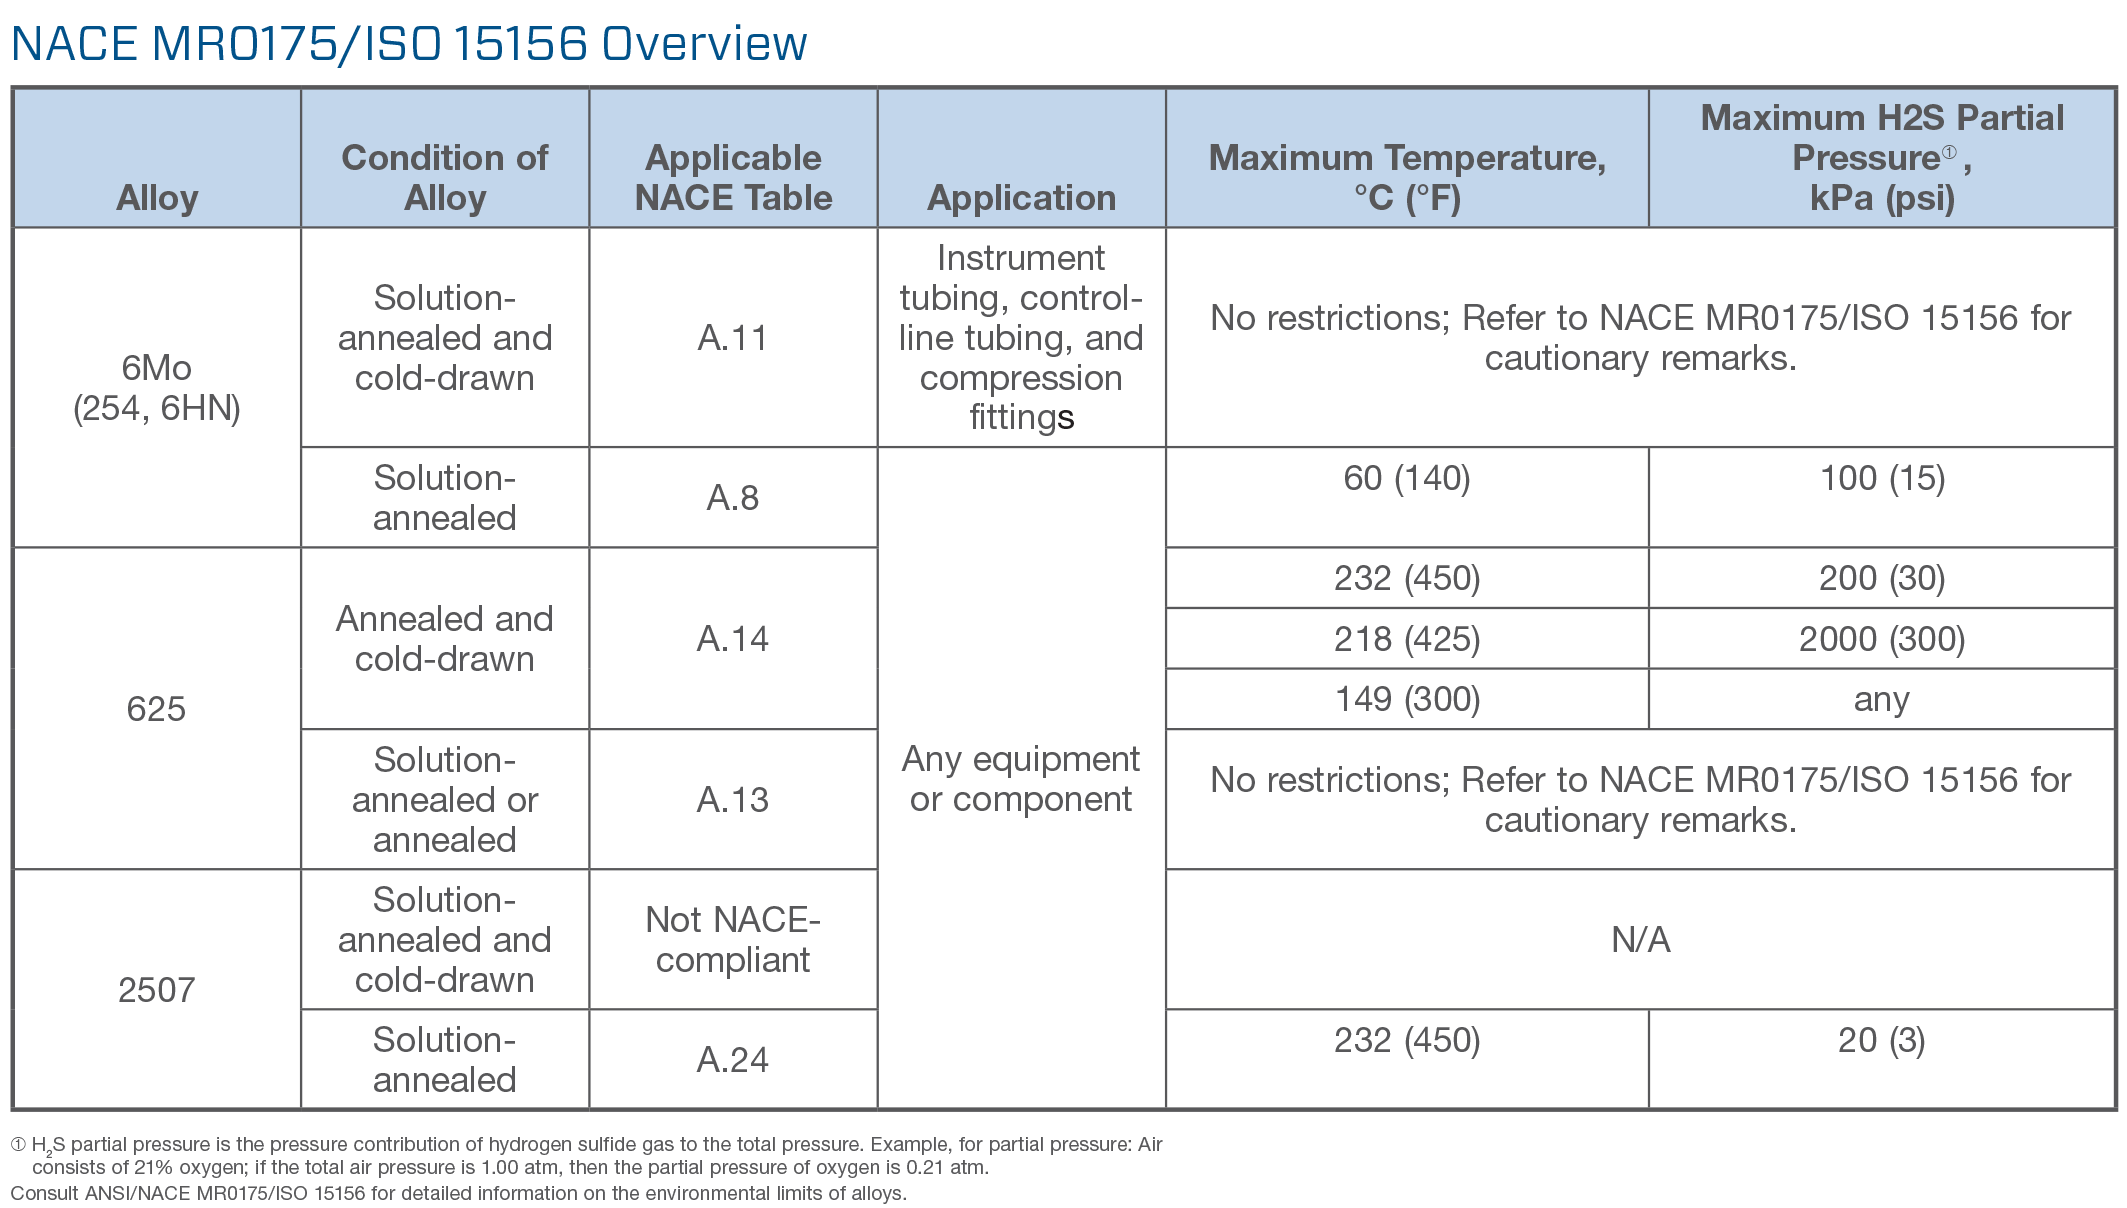 NACE MRO175 / ISO 15156 Overview